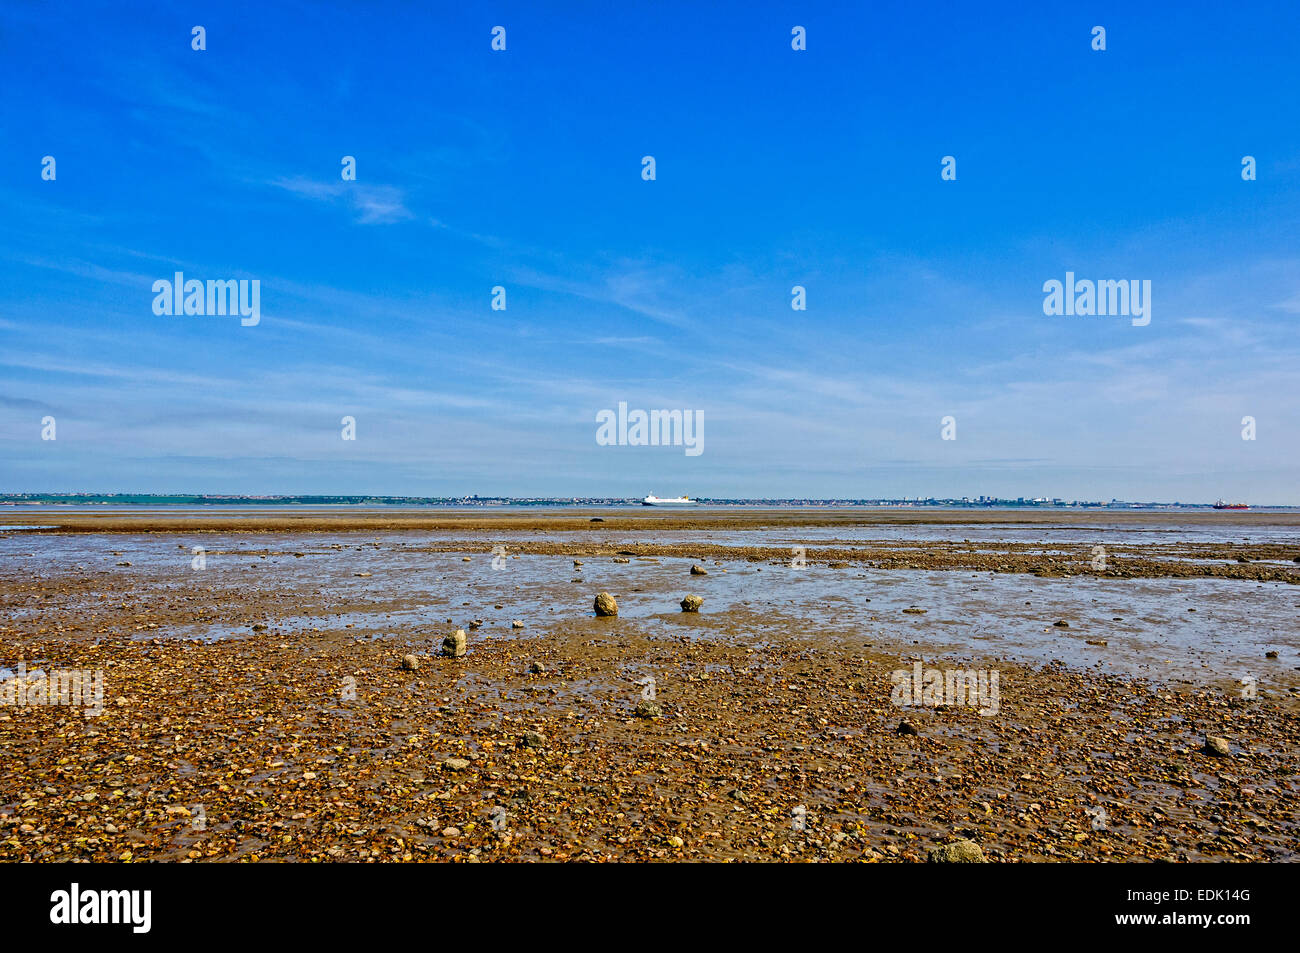 Two ships sail in opposite directions on a tranquil River Thames past a shingle muddy beach under an intense blue sky Stock Photo